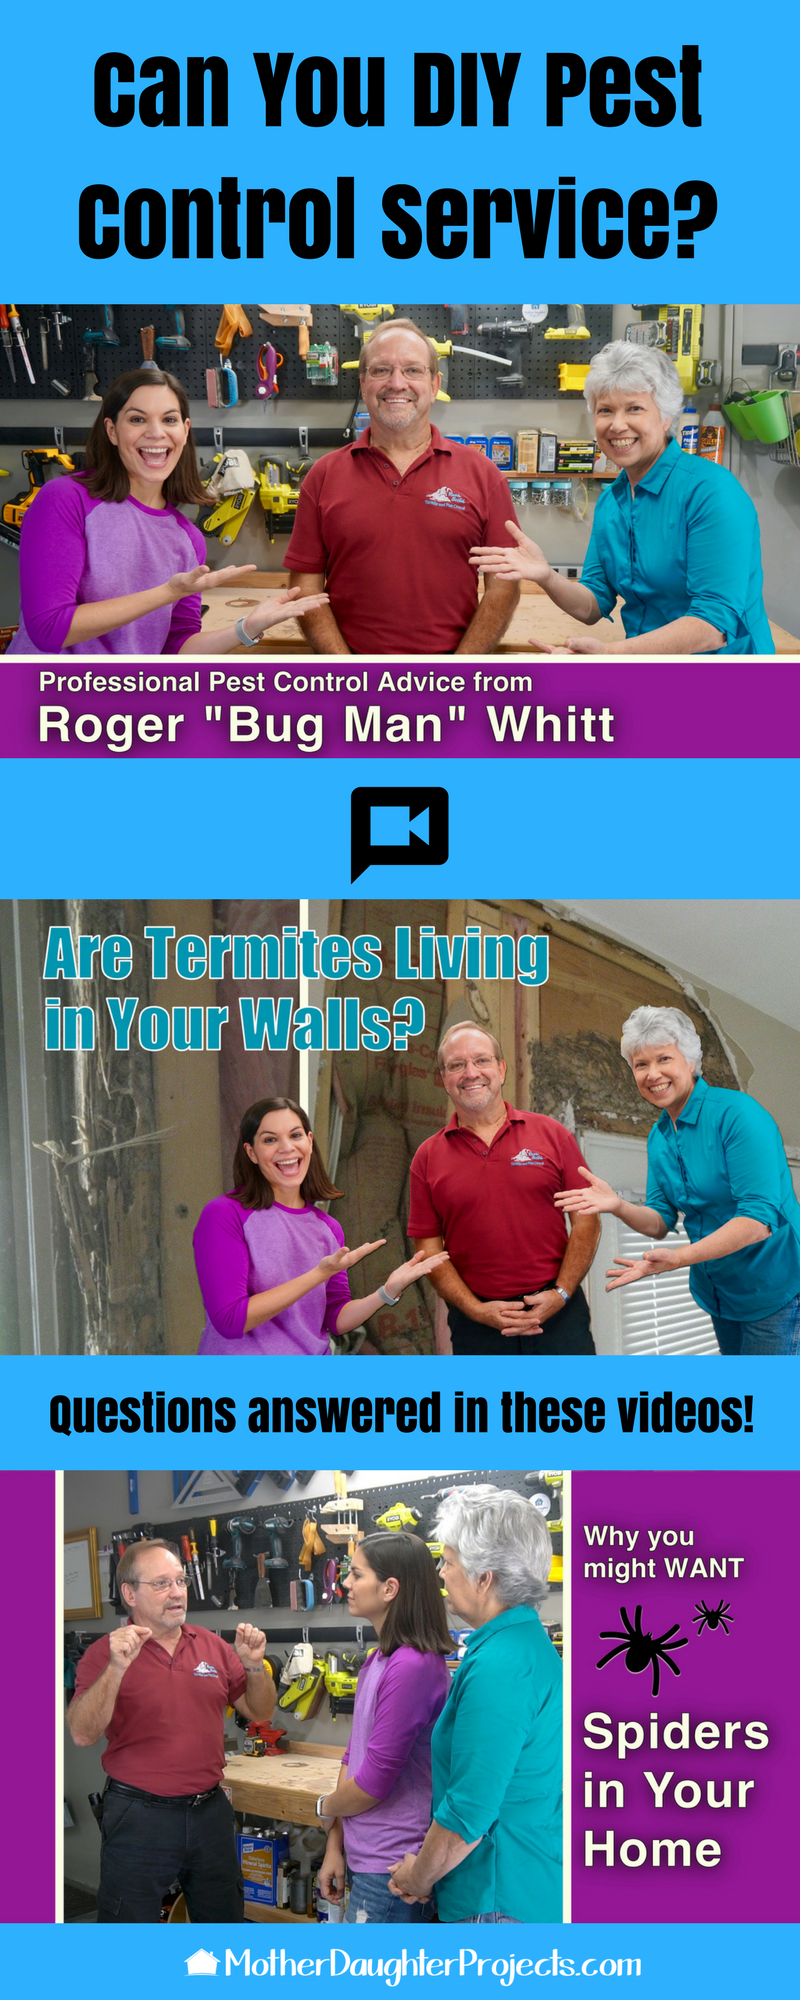 Learn all about pest control service and how to DIY your own  bug service in these videos!